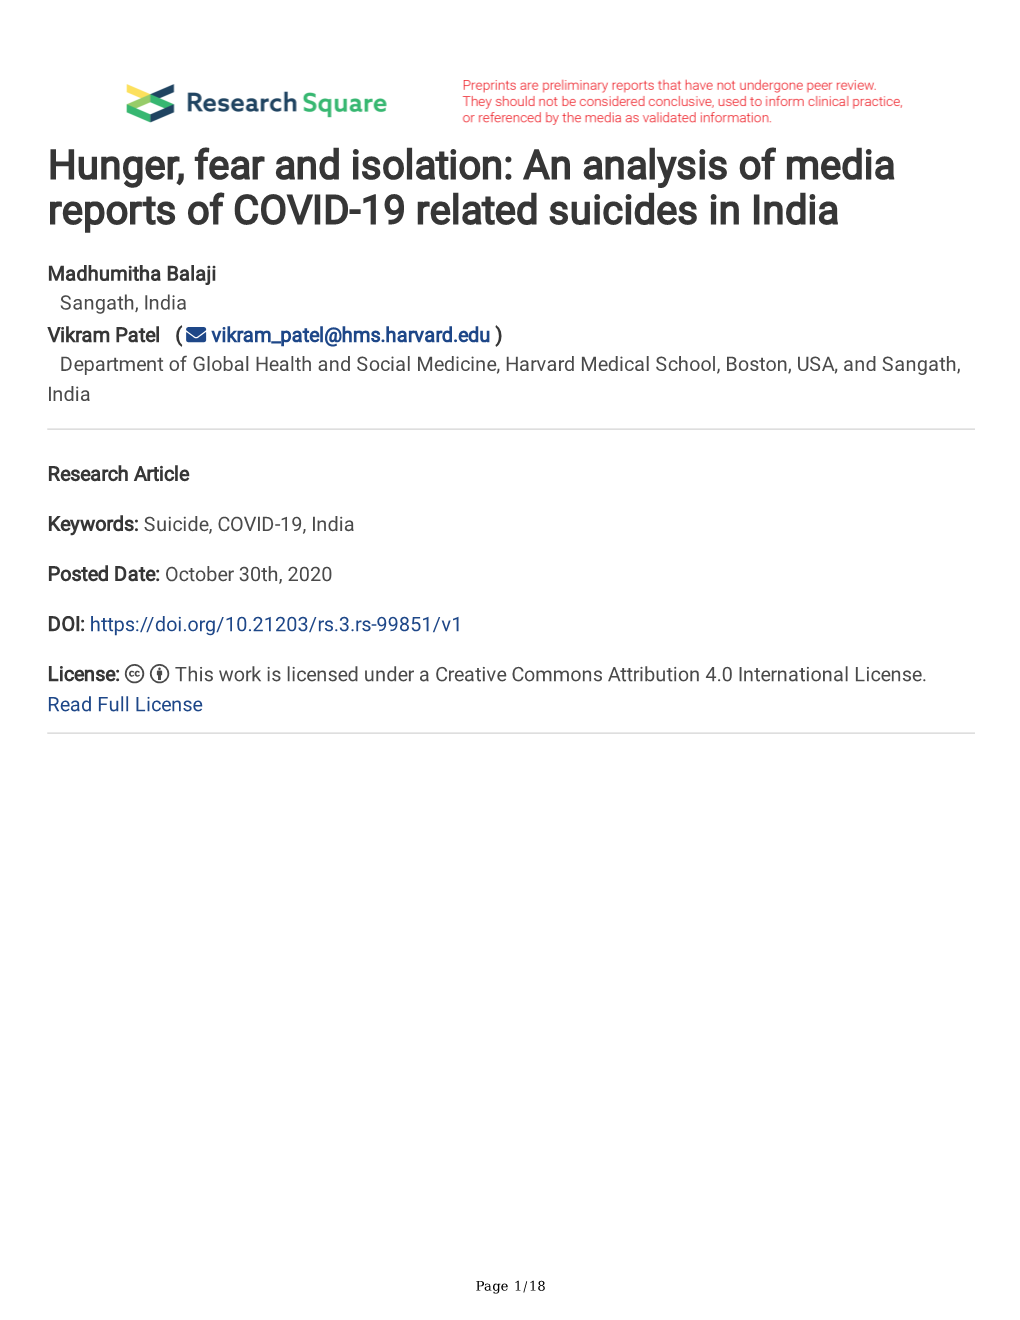 An Analysis of Media Reports of COVID-19 Related Suicides in India